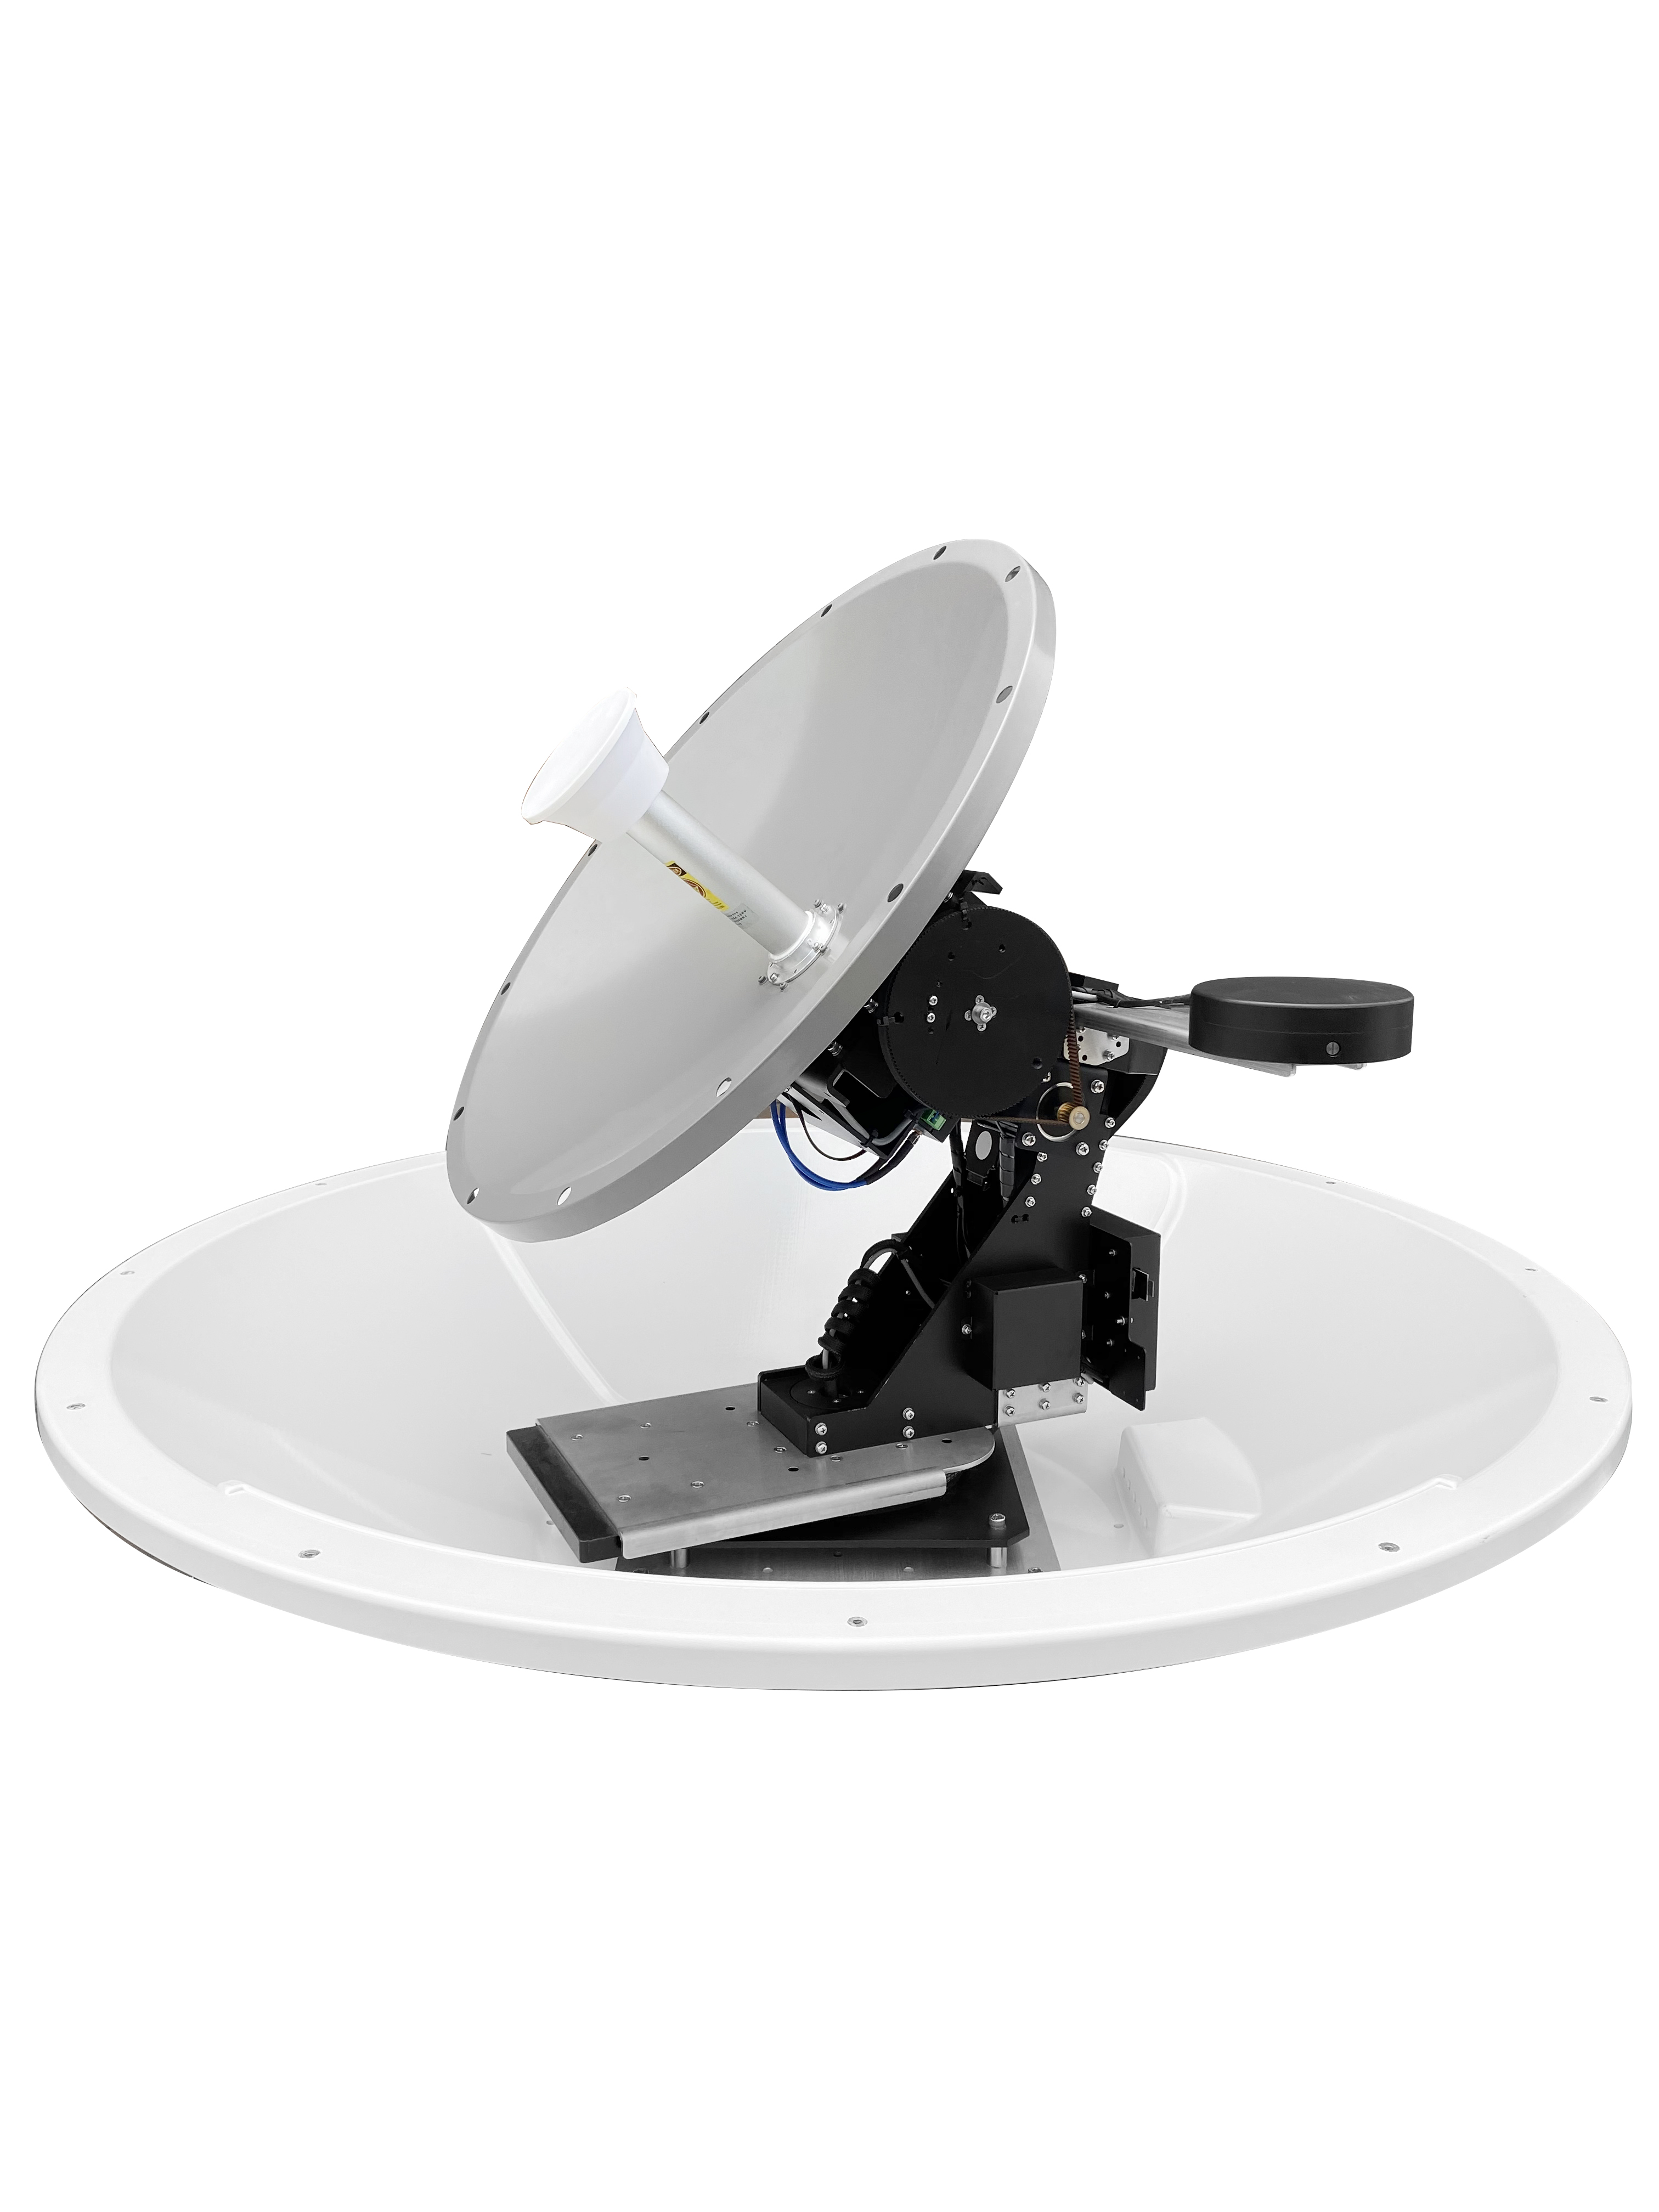 60cm Dish Diameter，High Gain Parabolic Antenna with 3-Axis mechanical design，Point to Point Tracking